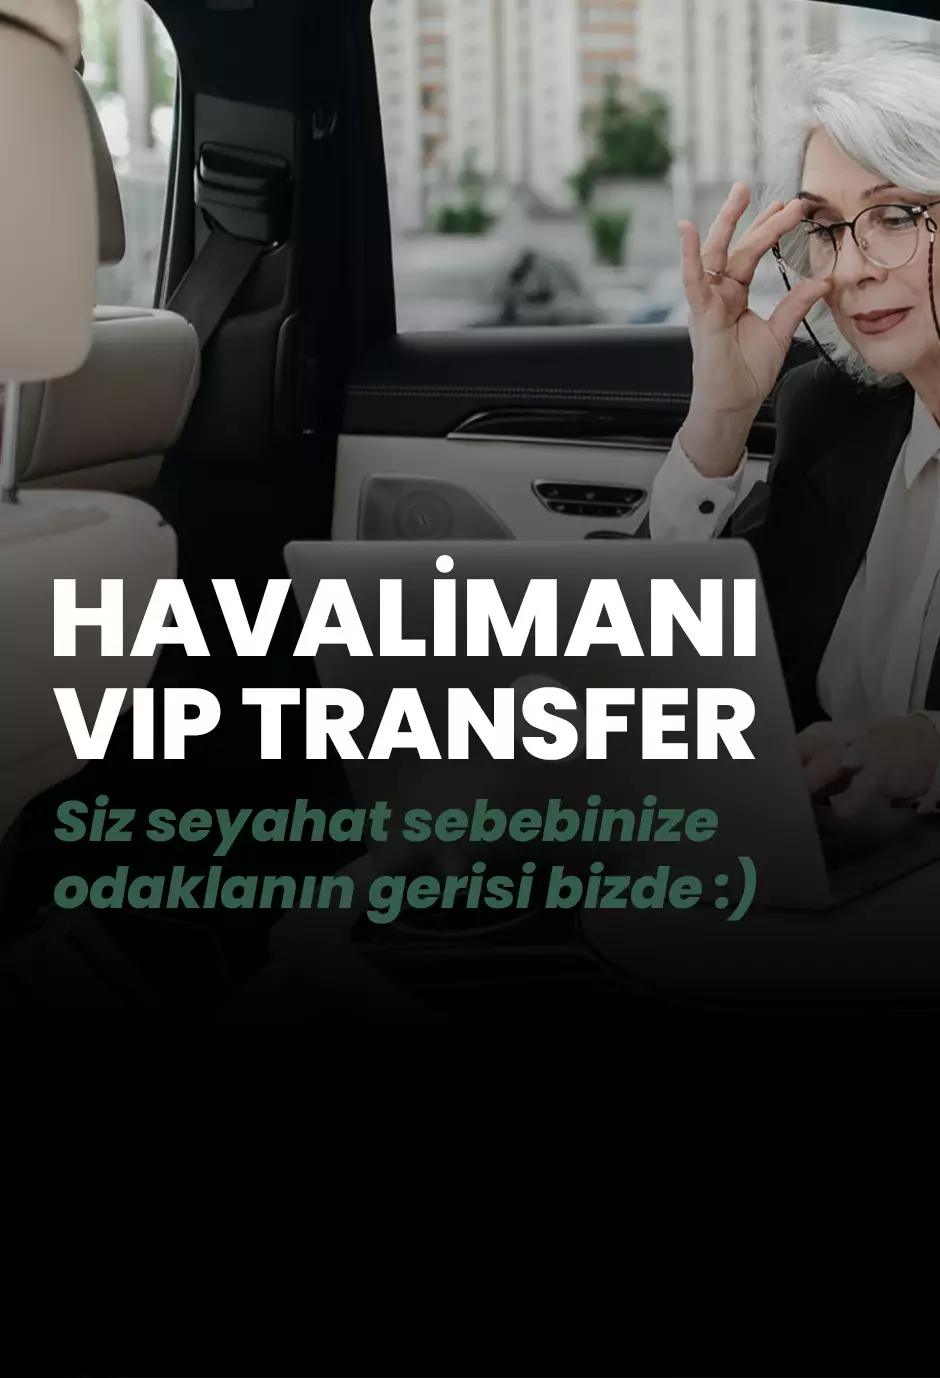 20% Discount on Airport VIP Transfer!